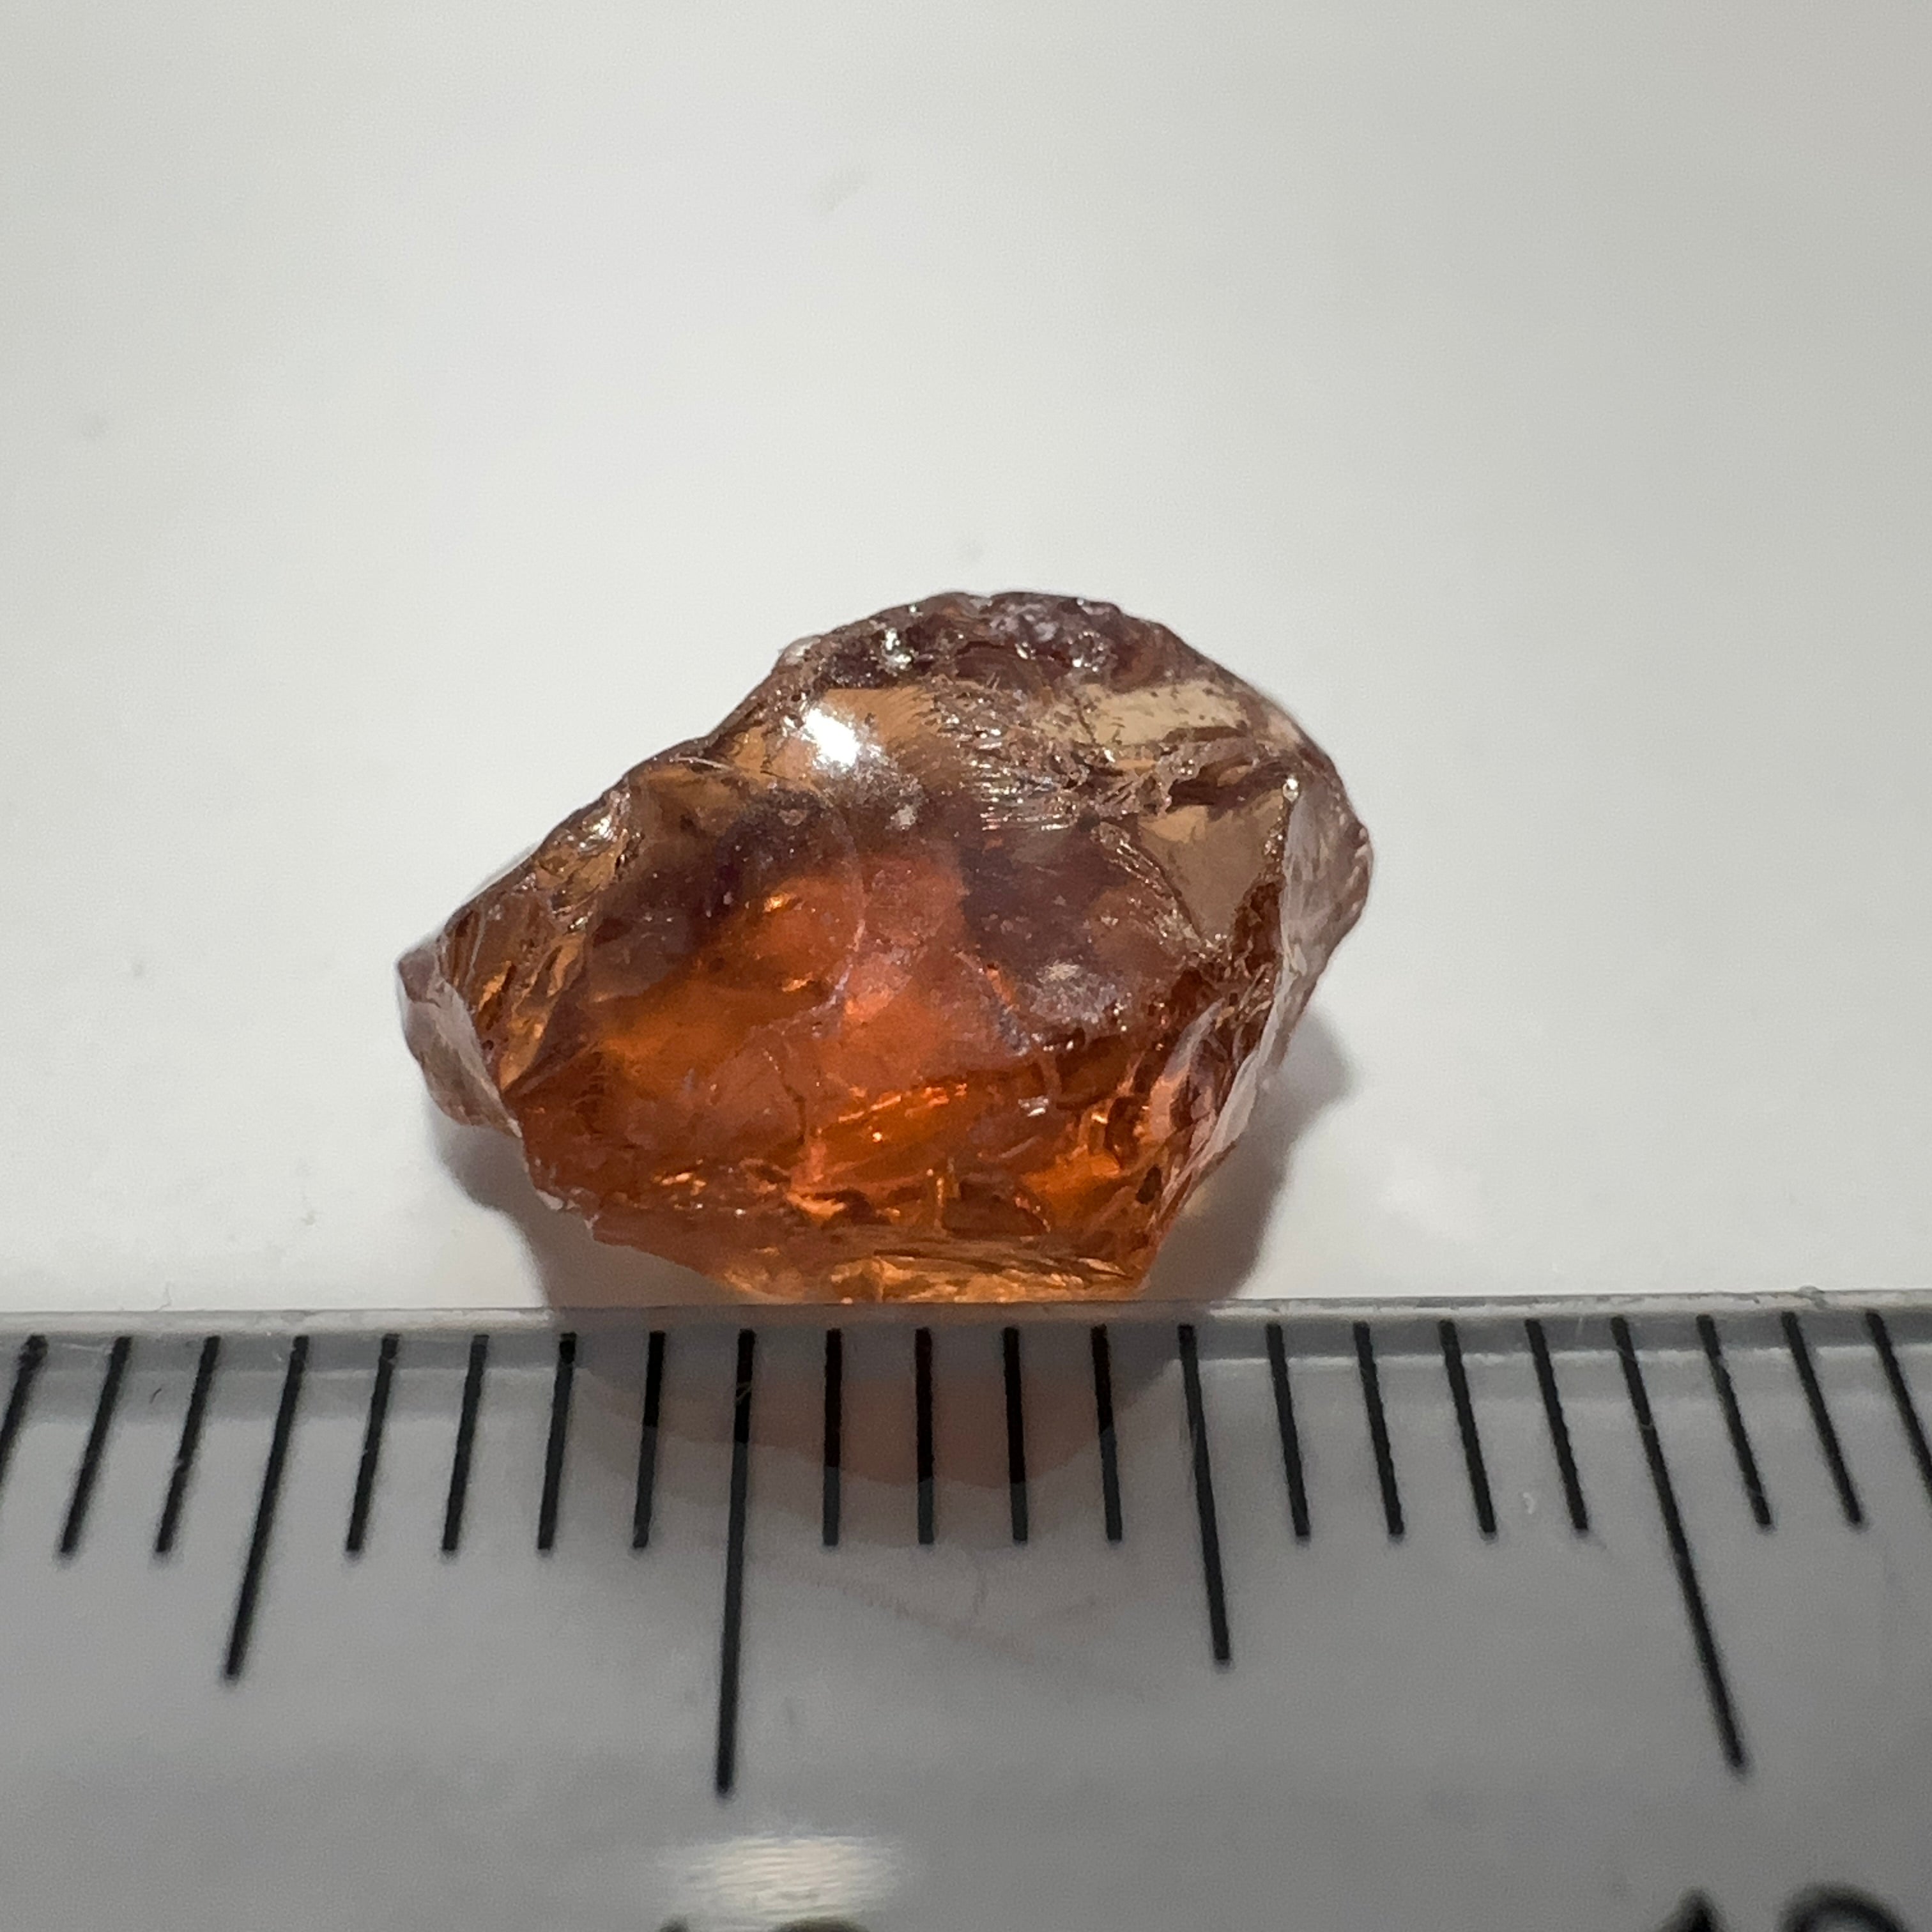 5.90ct Malaya Garnet, Untreated Unheated. Fingerprint inclusion right in the center